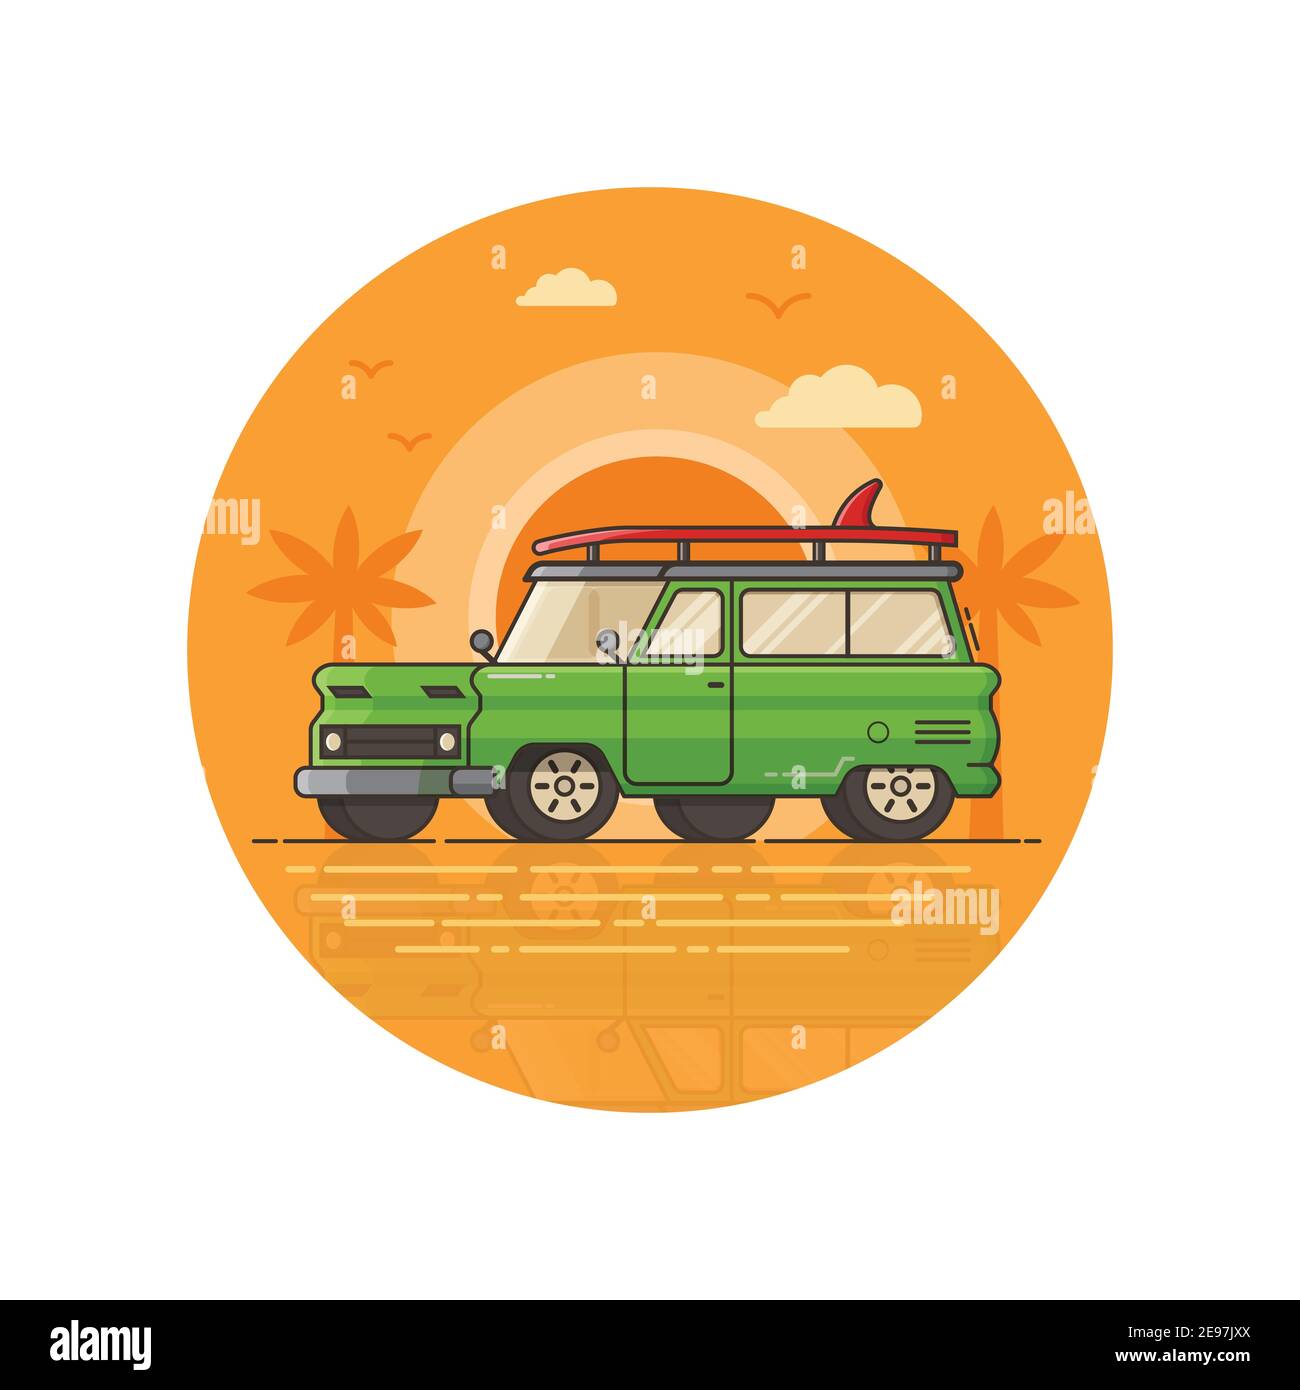 Surfing Car Seaside Icon in Line Art Stock Vector